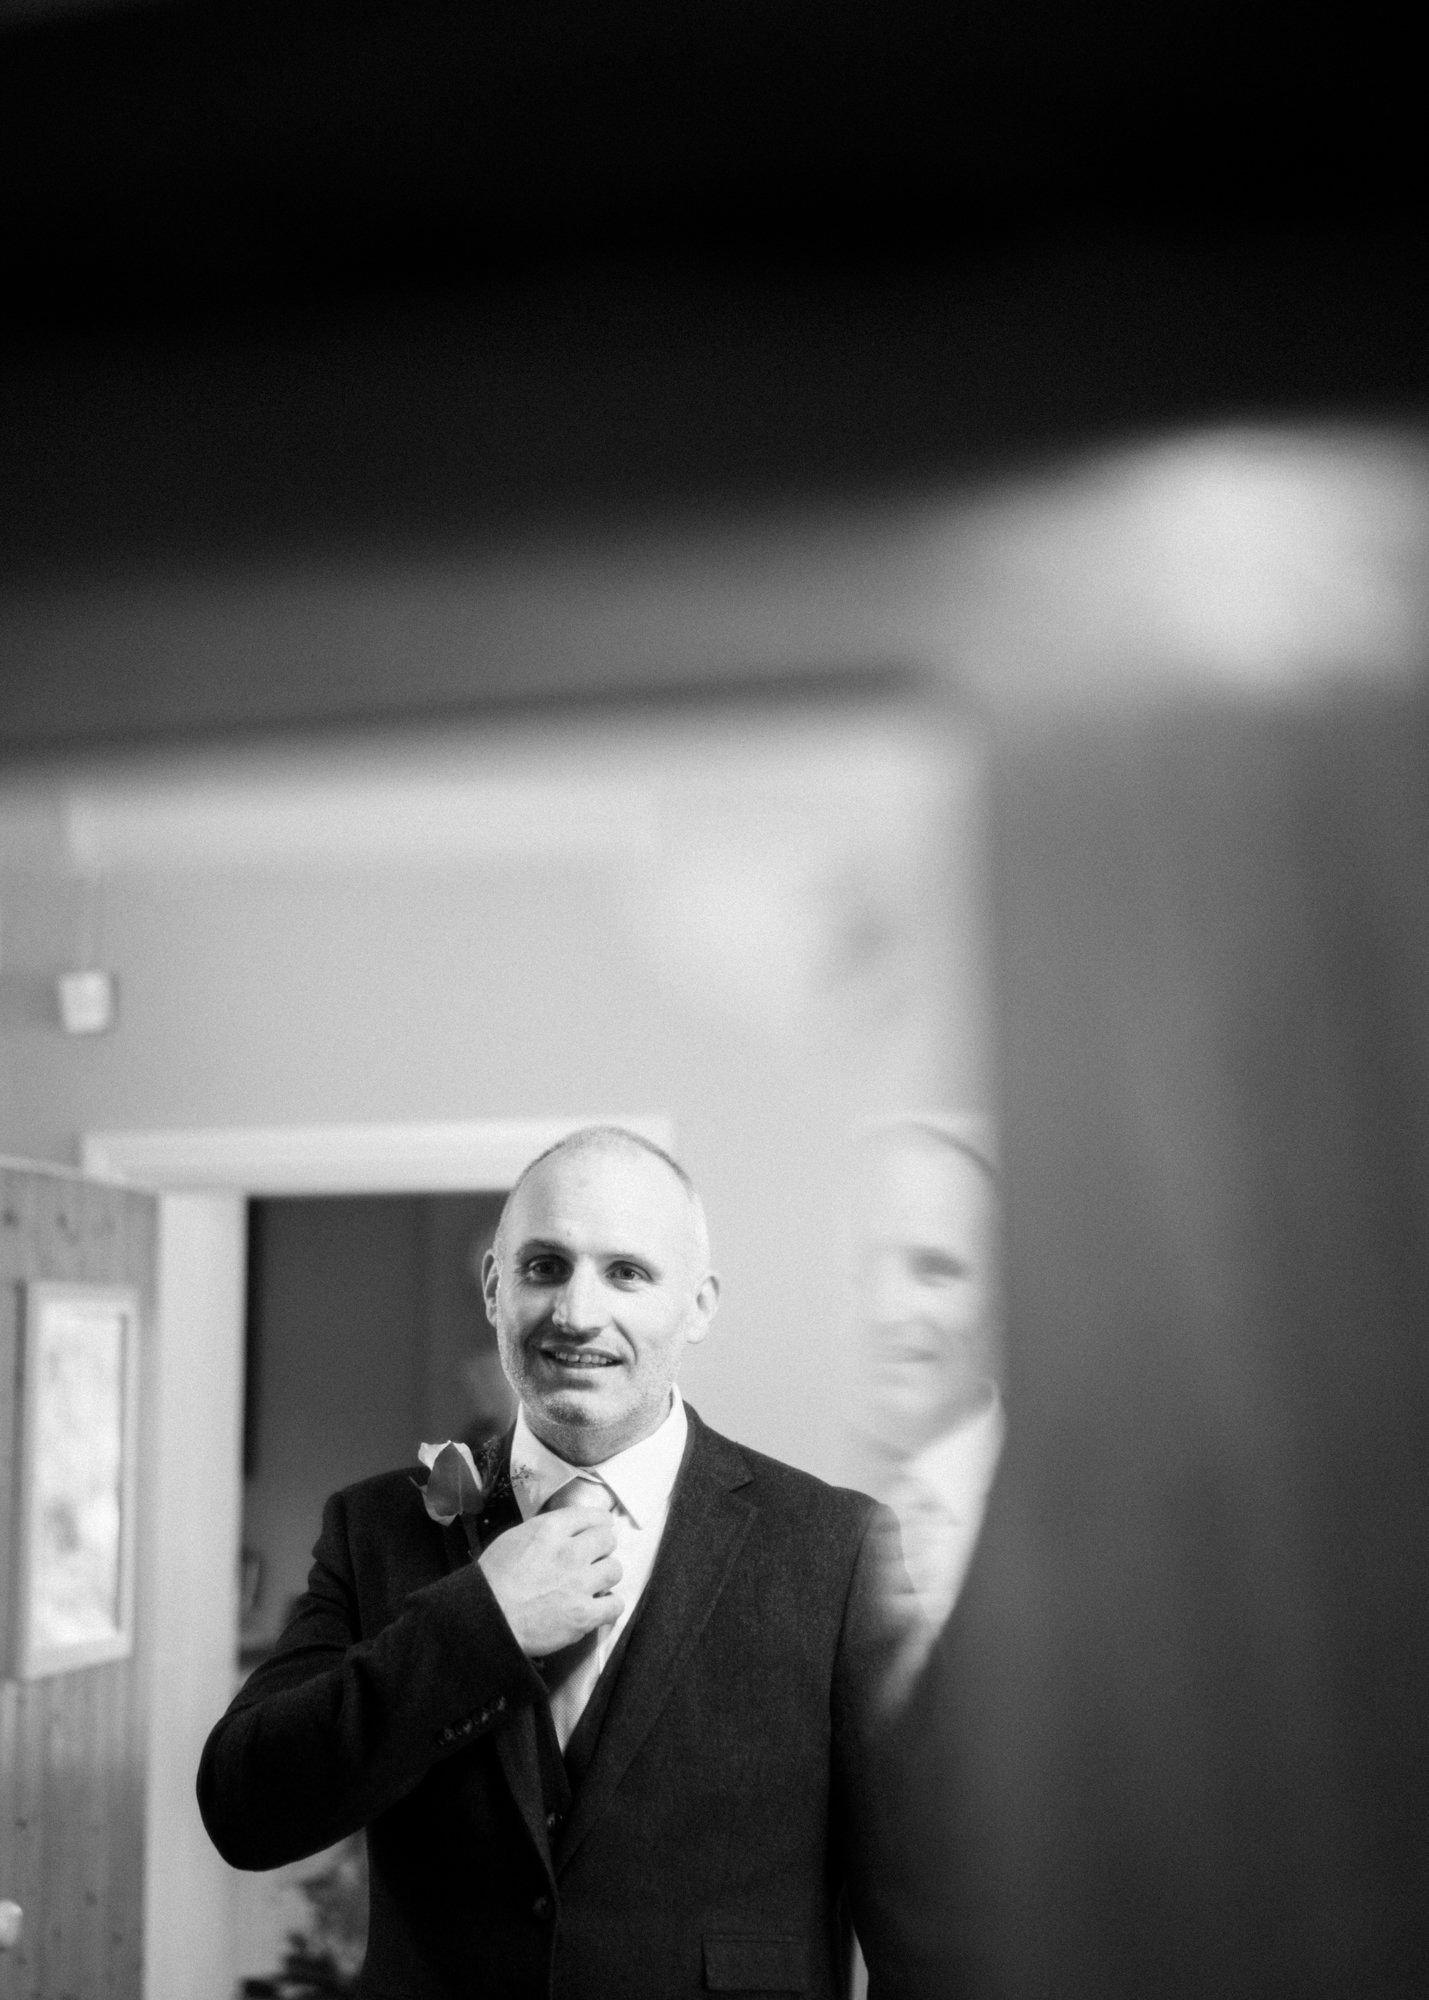 Reflection of the groom